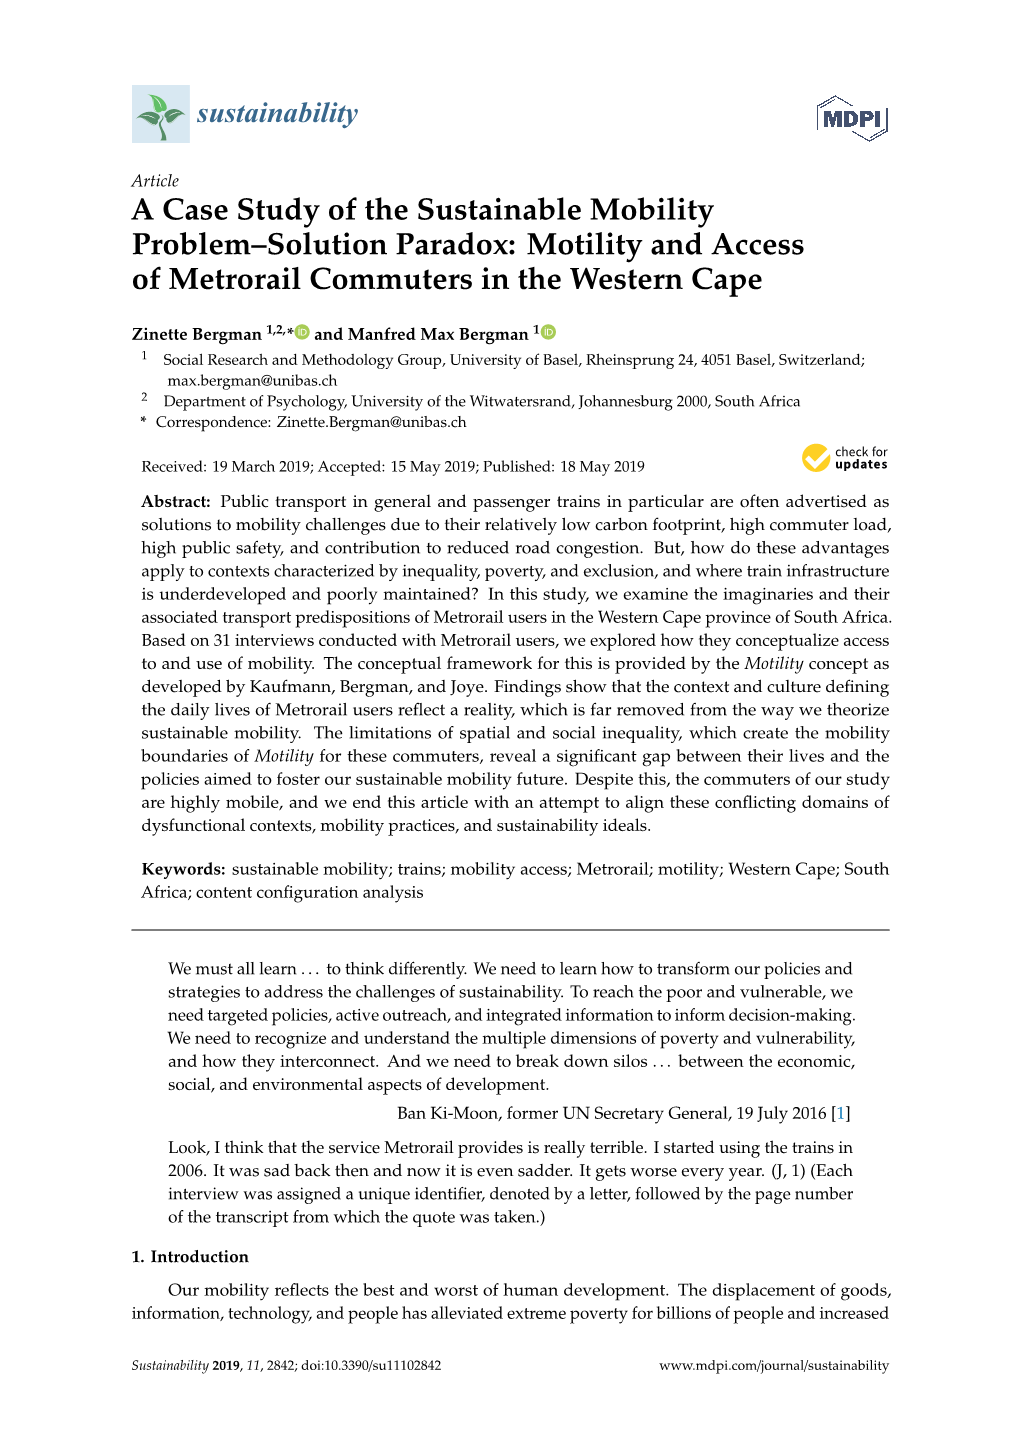 A Case Study of the Sustainable Mobility Problem–Solution Paradox: Motility and Access of Metrorail Commuters in the Western Cape